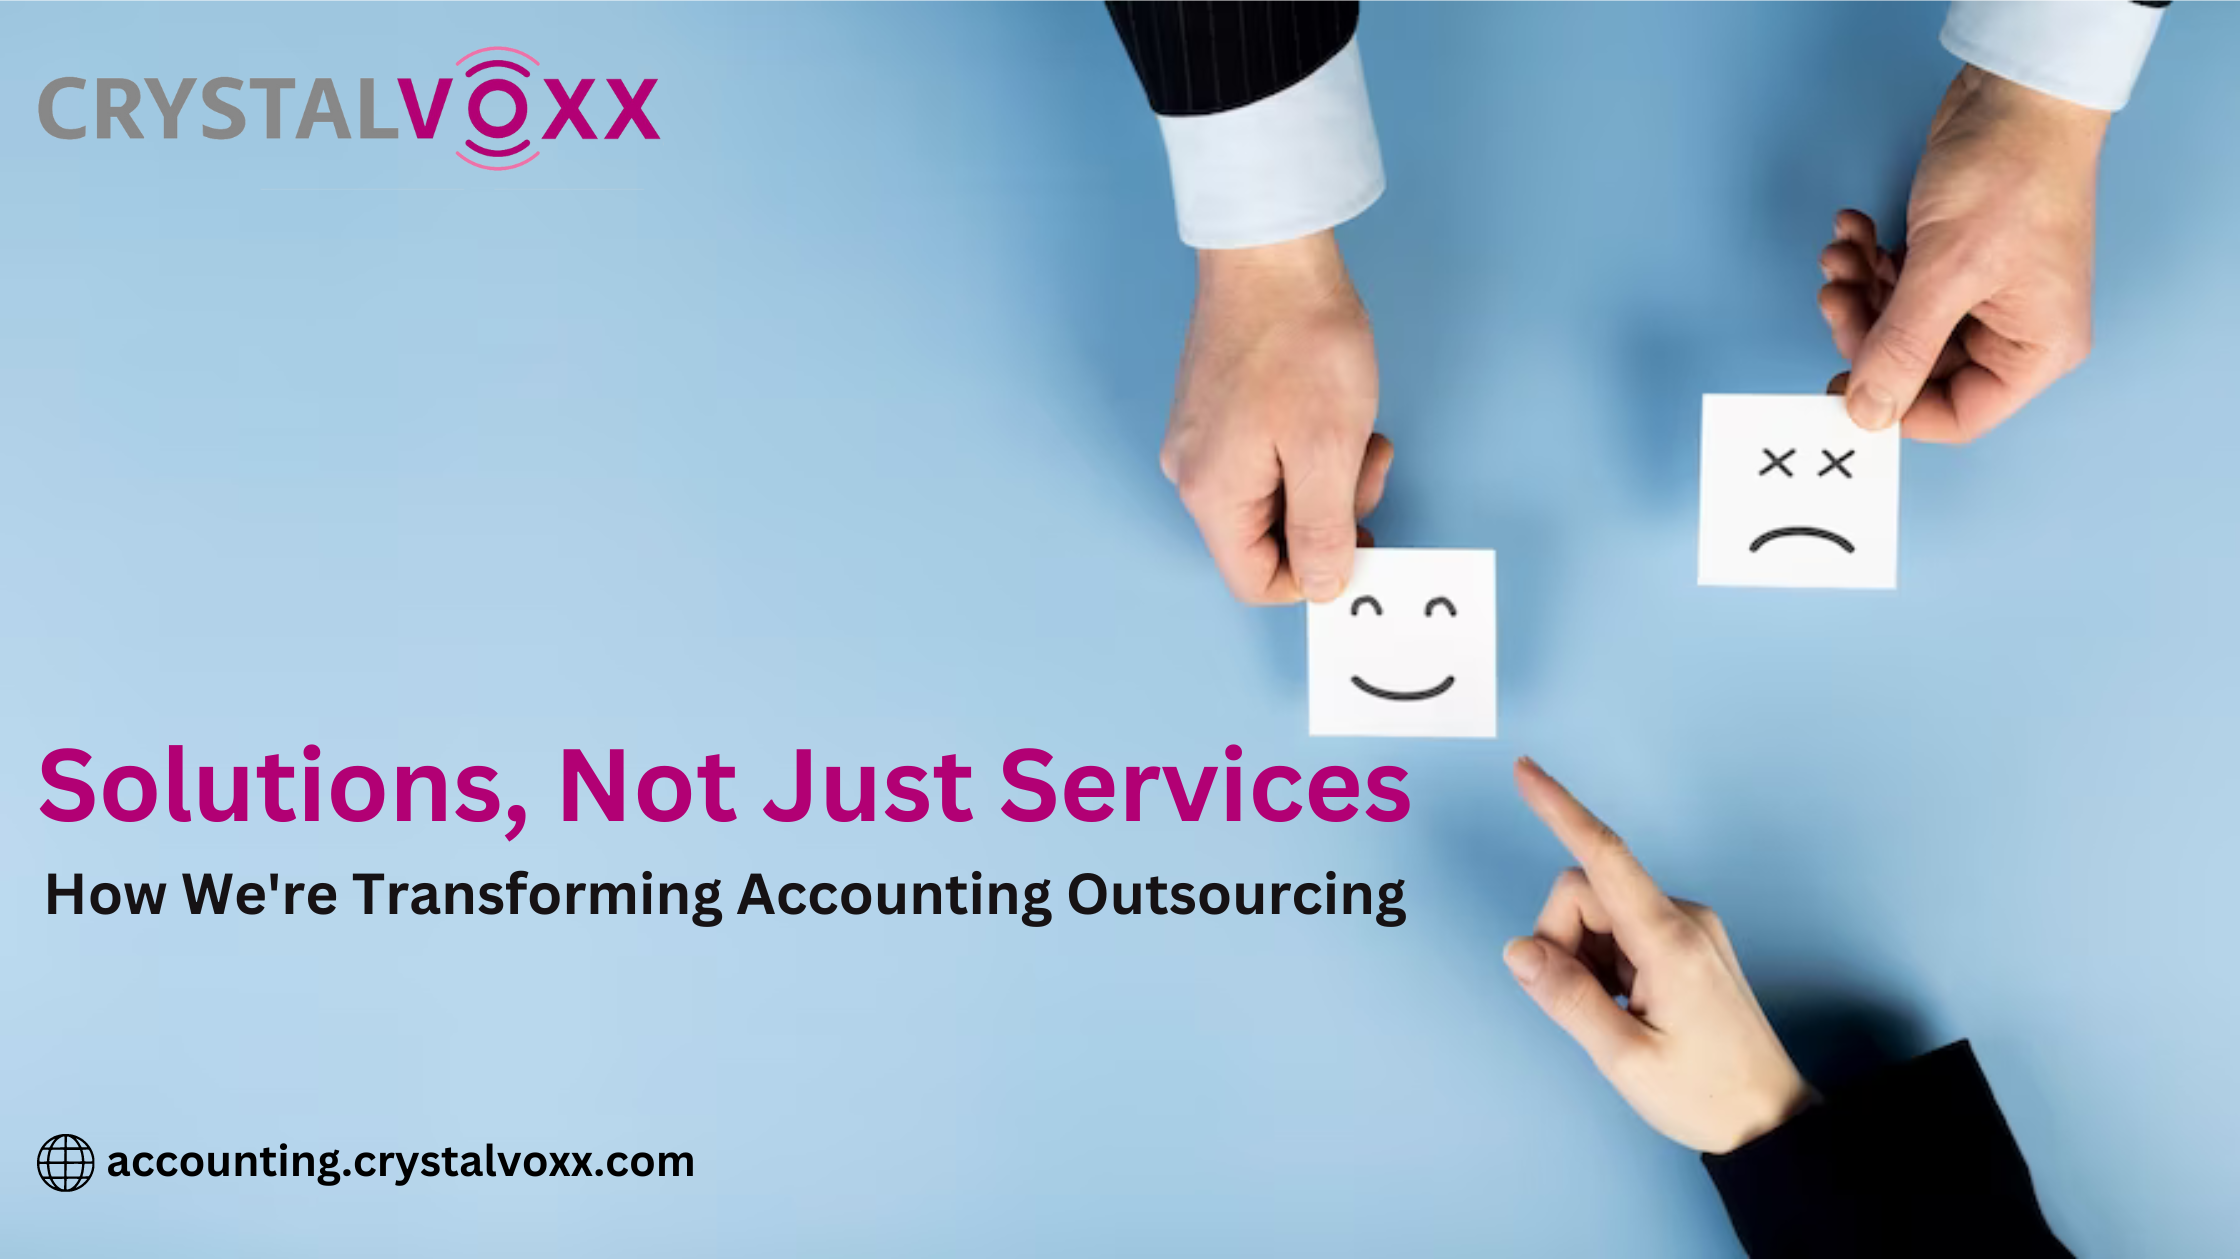 Our utmost priority is to provide practical solutions, rather than just offering services. We are driven to transform the landscape of accounting